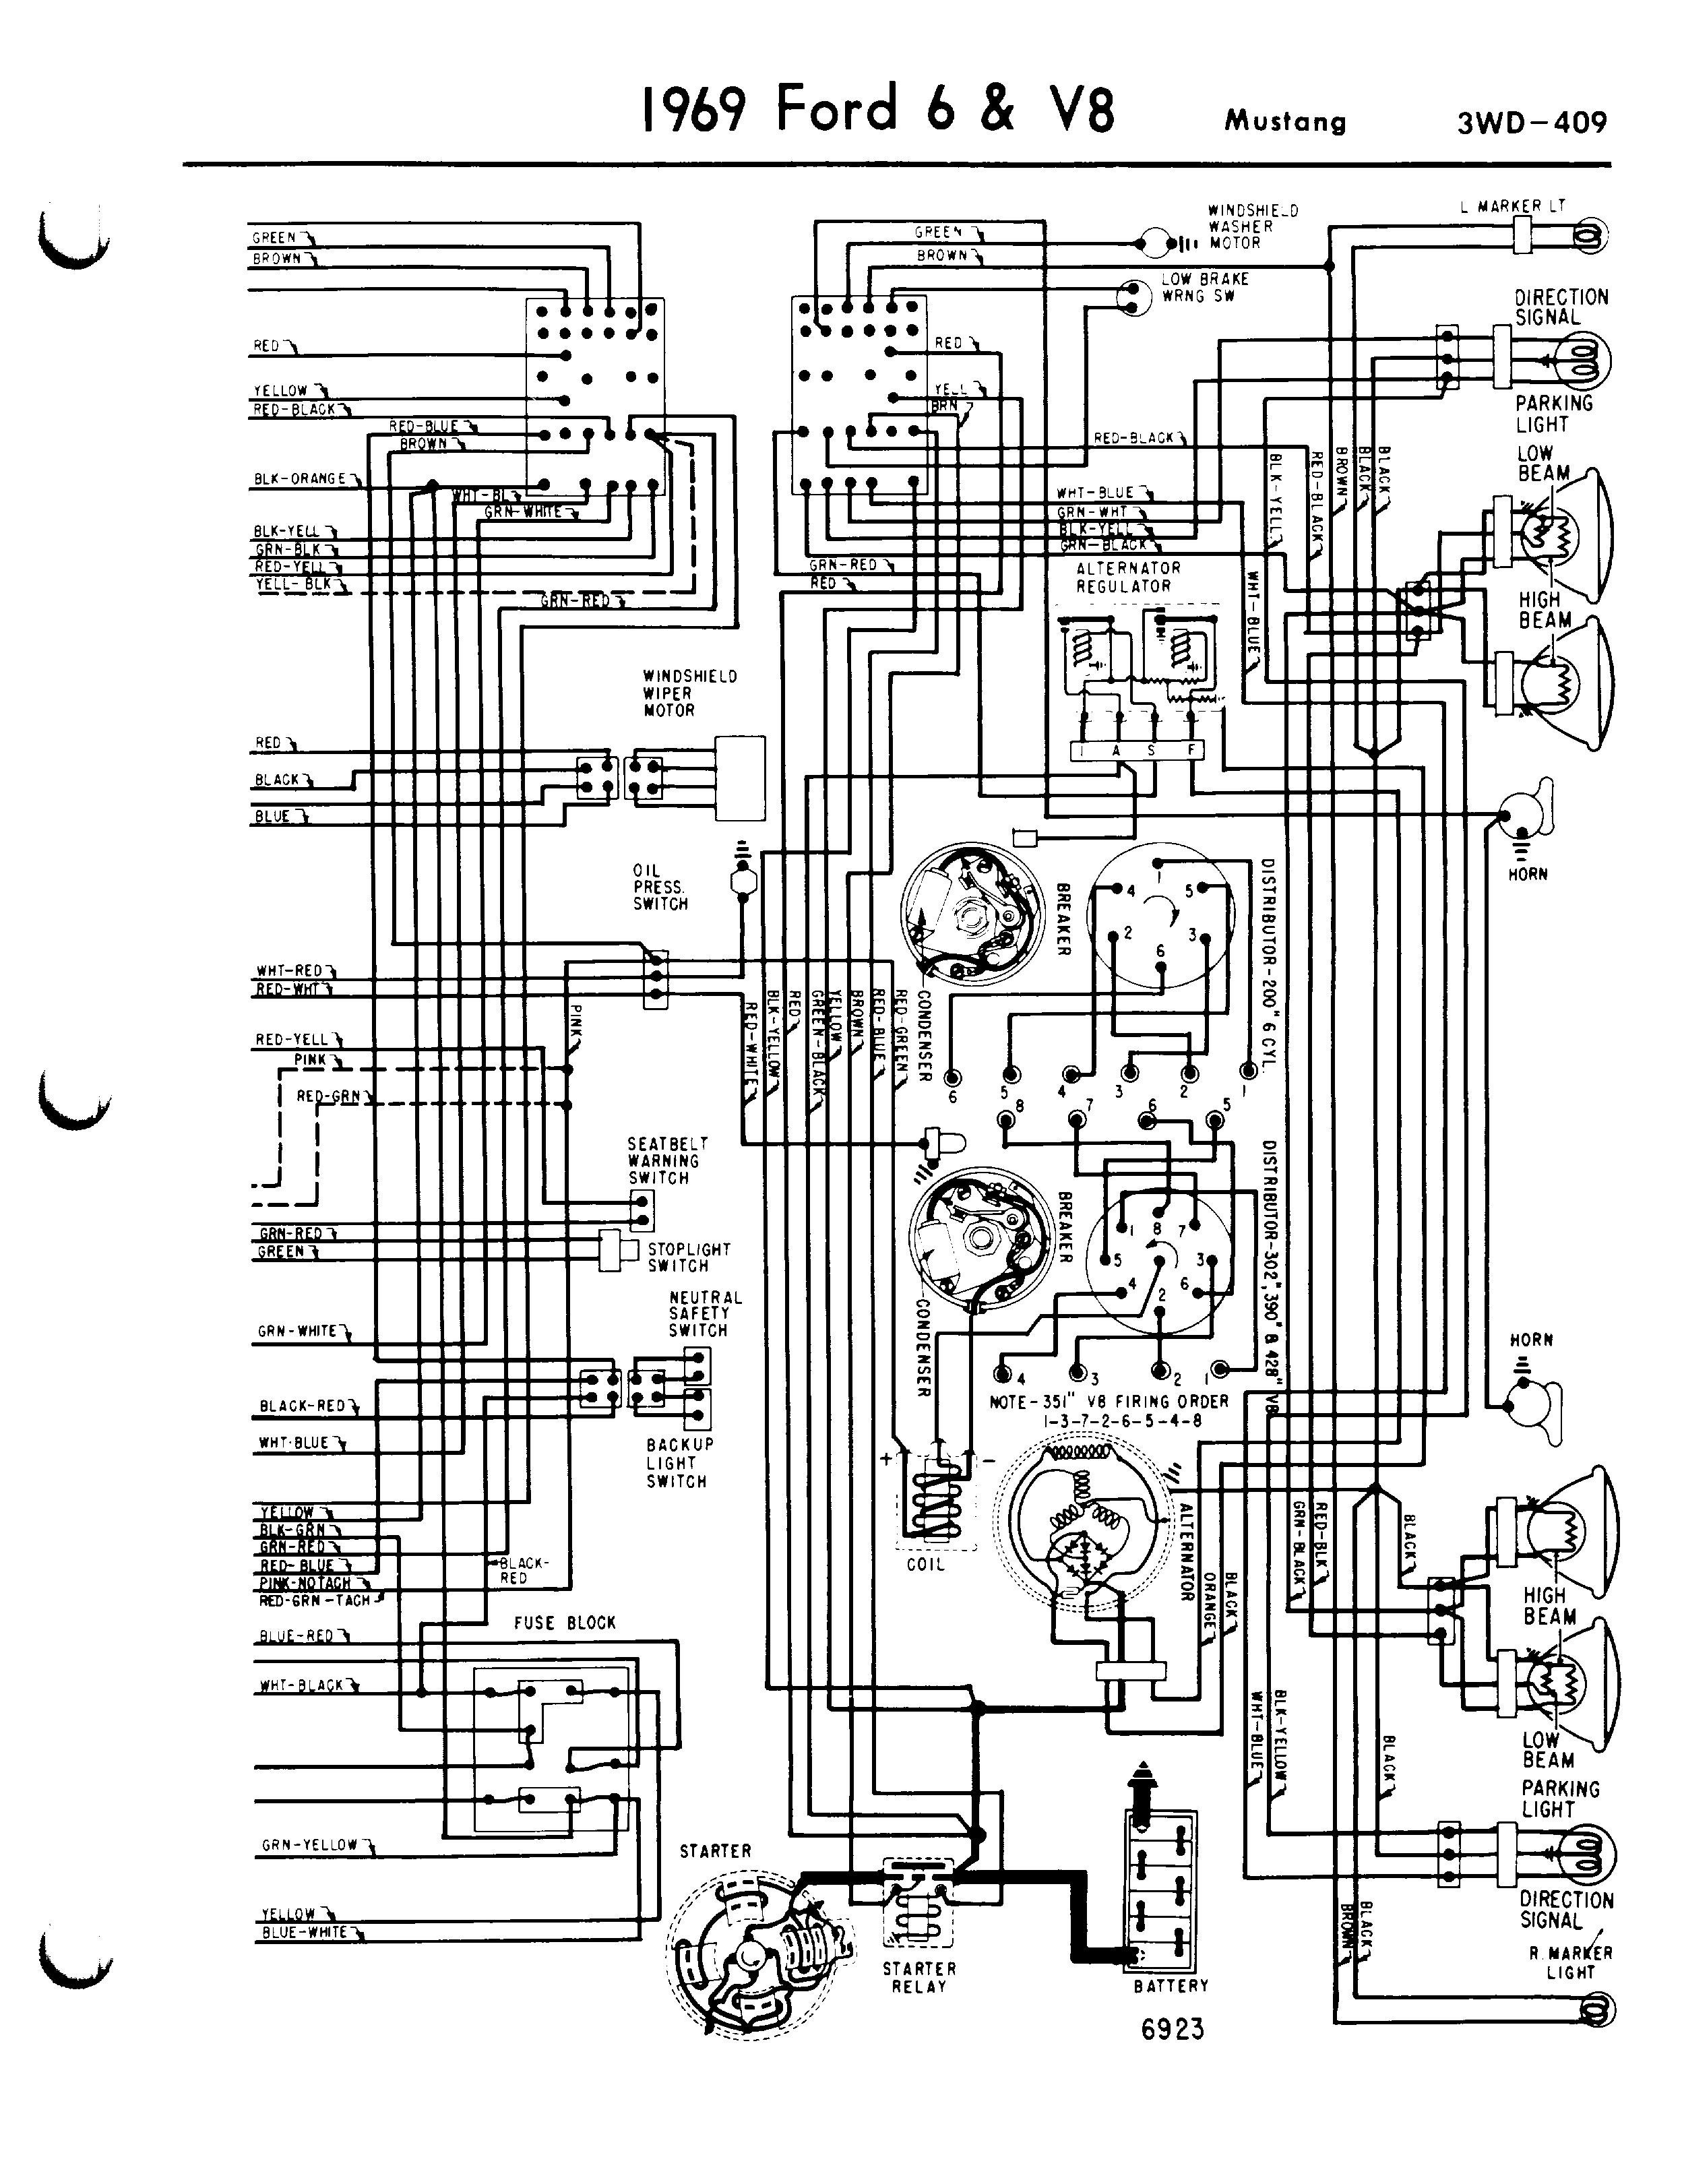 with 1972 ford ranchero fuse box wiring to her with 1970 ford rh linxglobal co 1973 Mustang Wiring Schematic 1966 Mustang Wiring Diagram